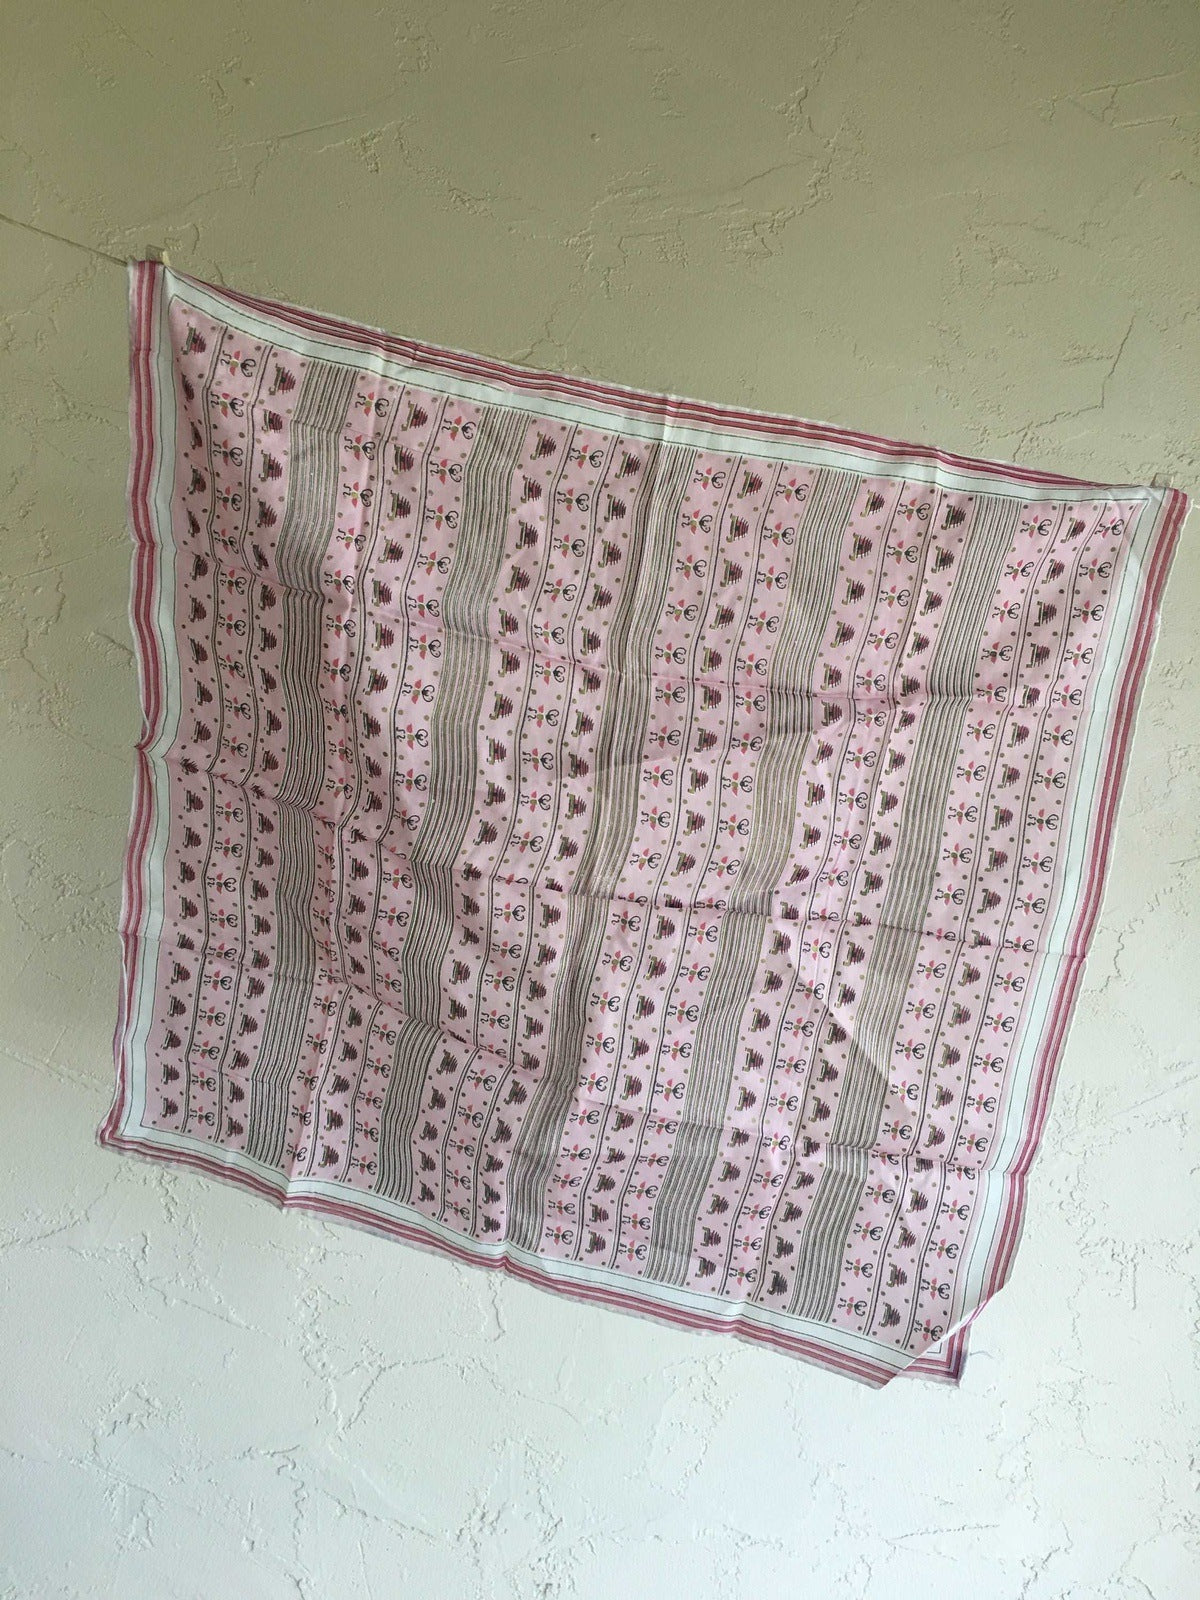 Beehive Themed Pink Silk Scarf - A Vintage Tribute to the Industrious Bee